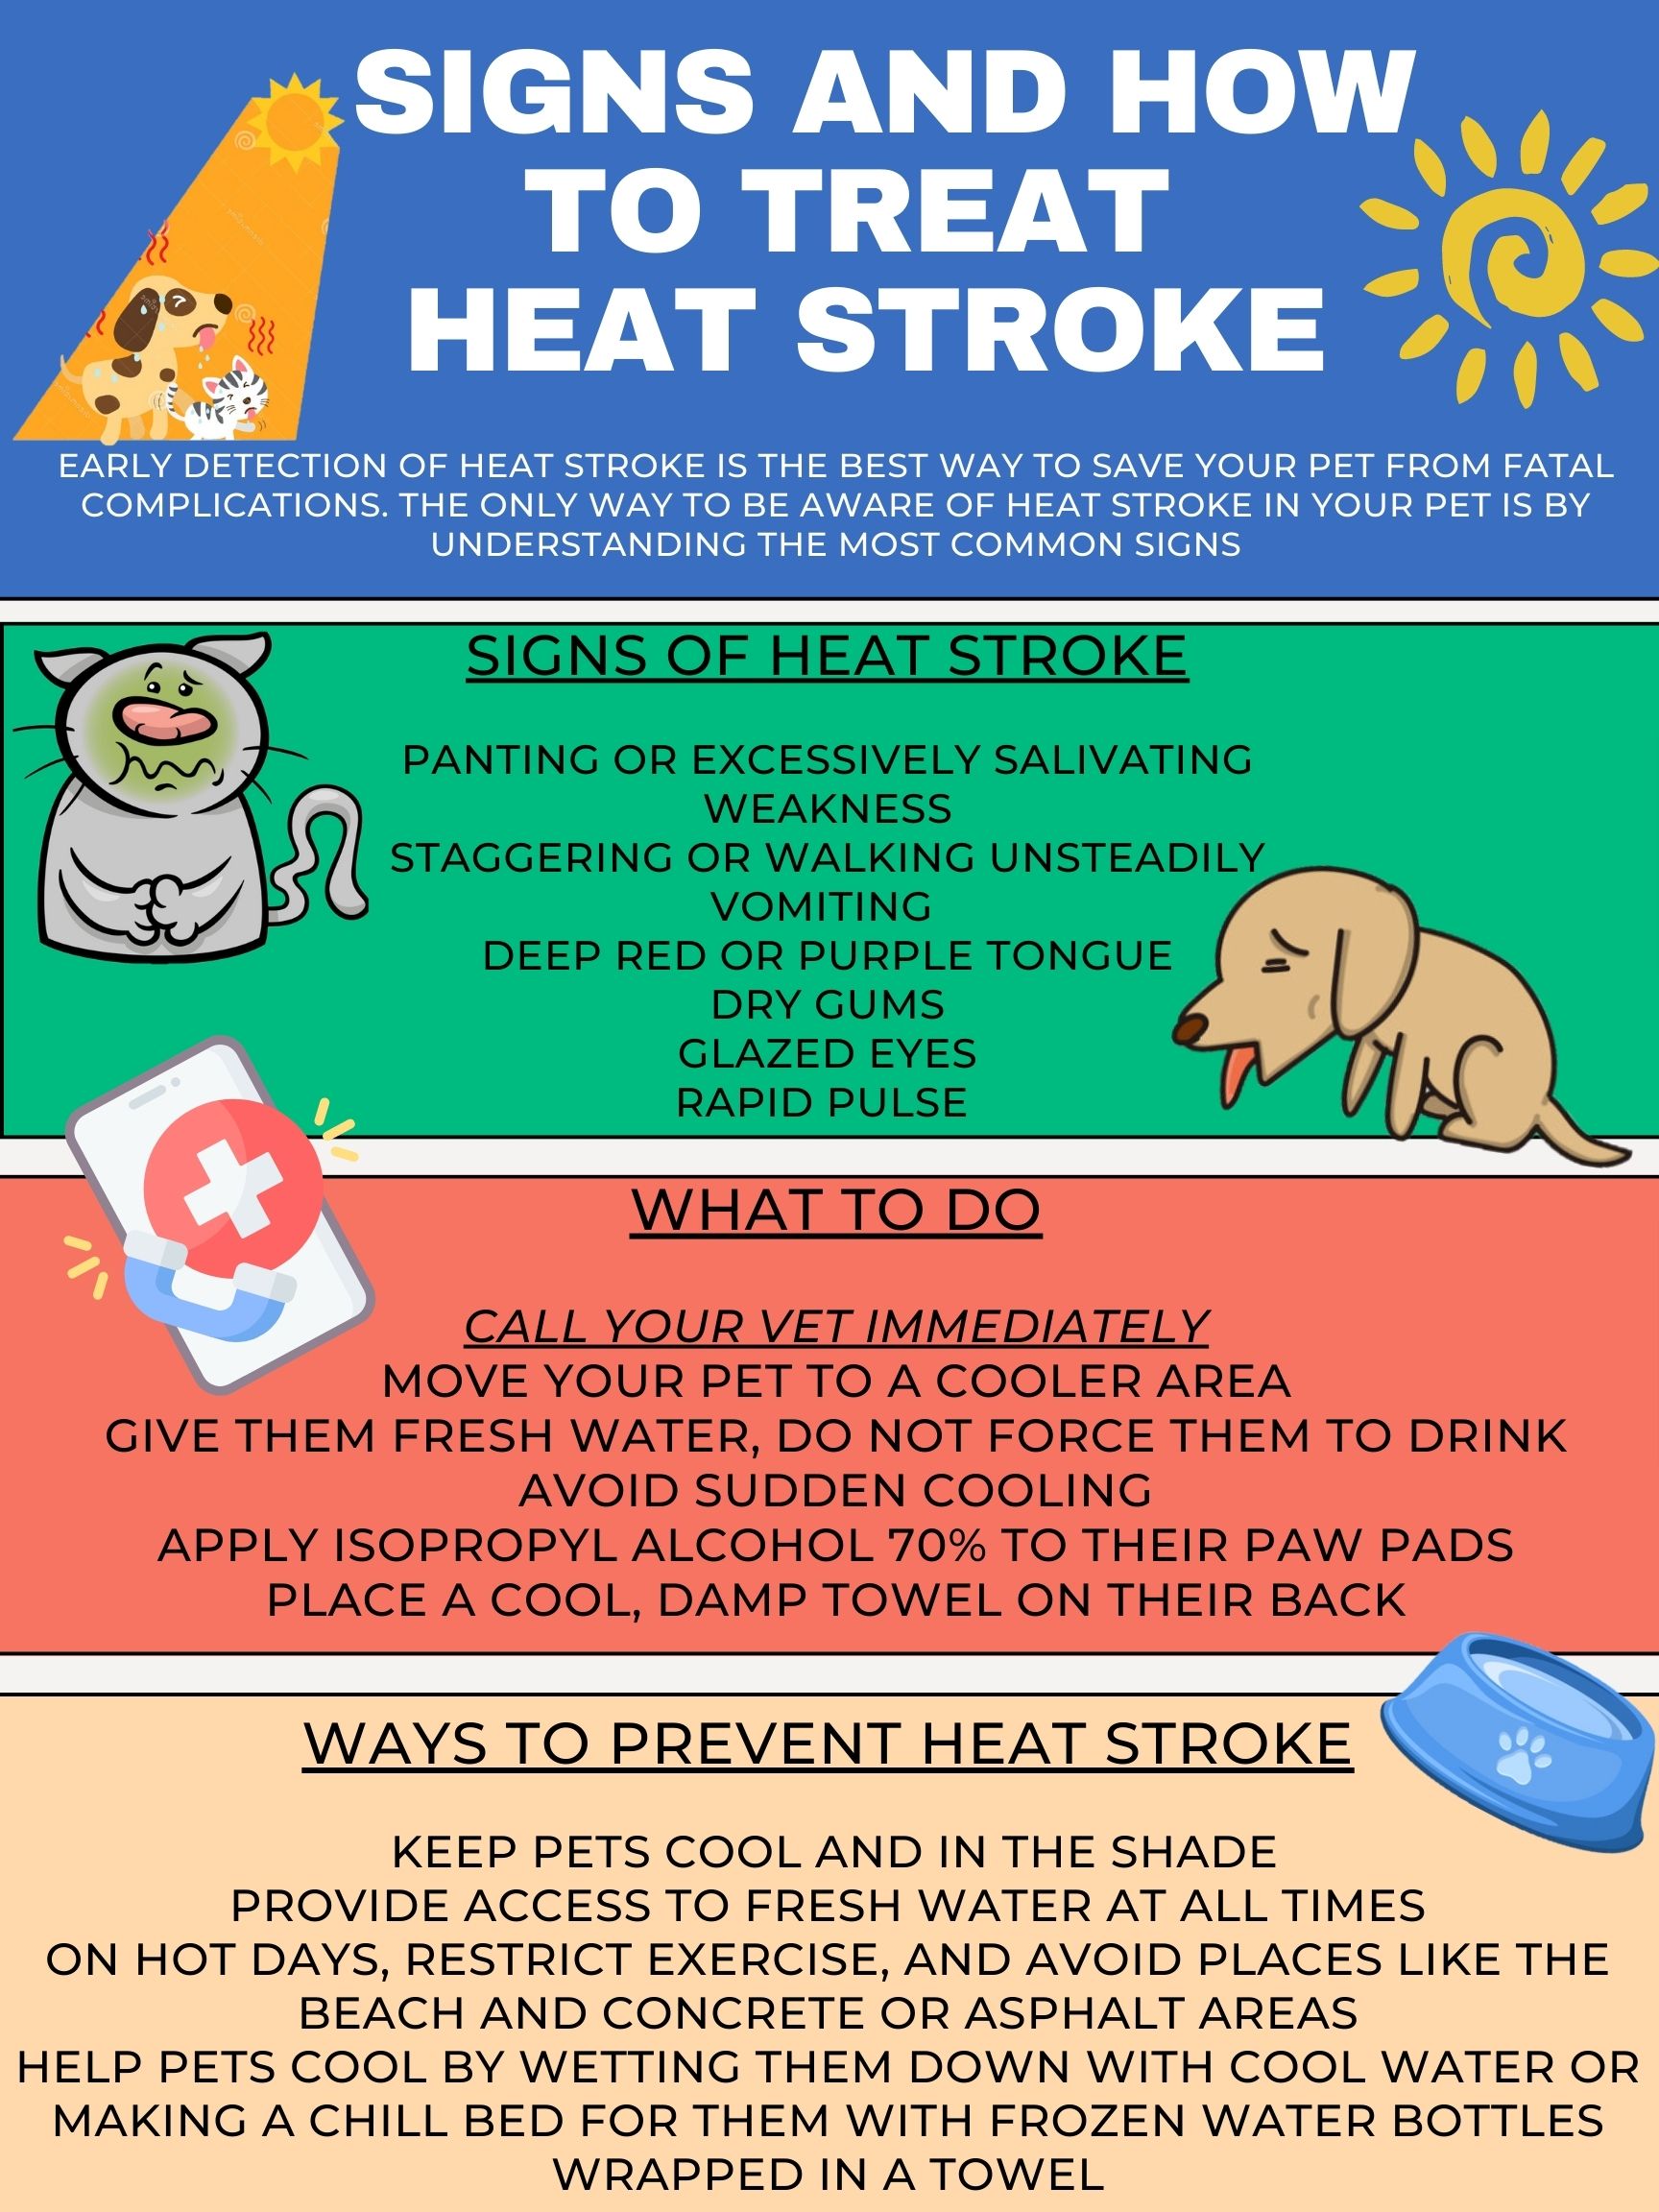 Signs and How to Treat Heat Stroke